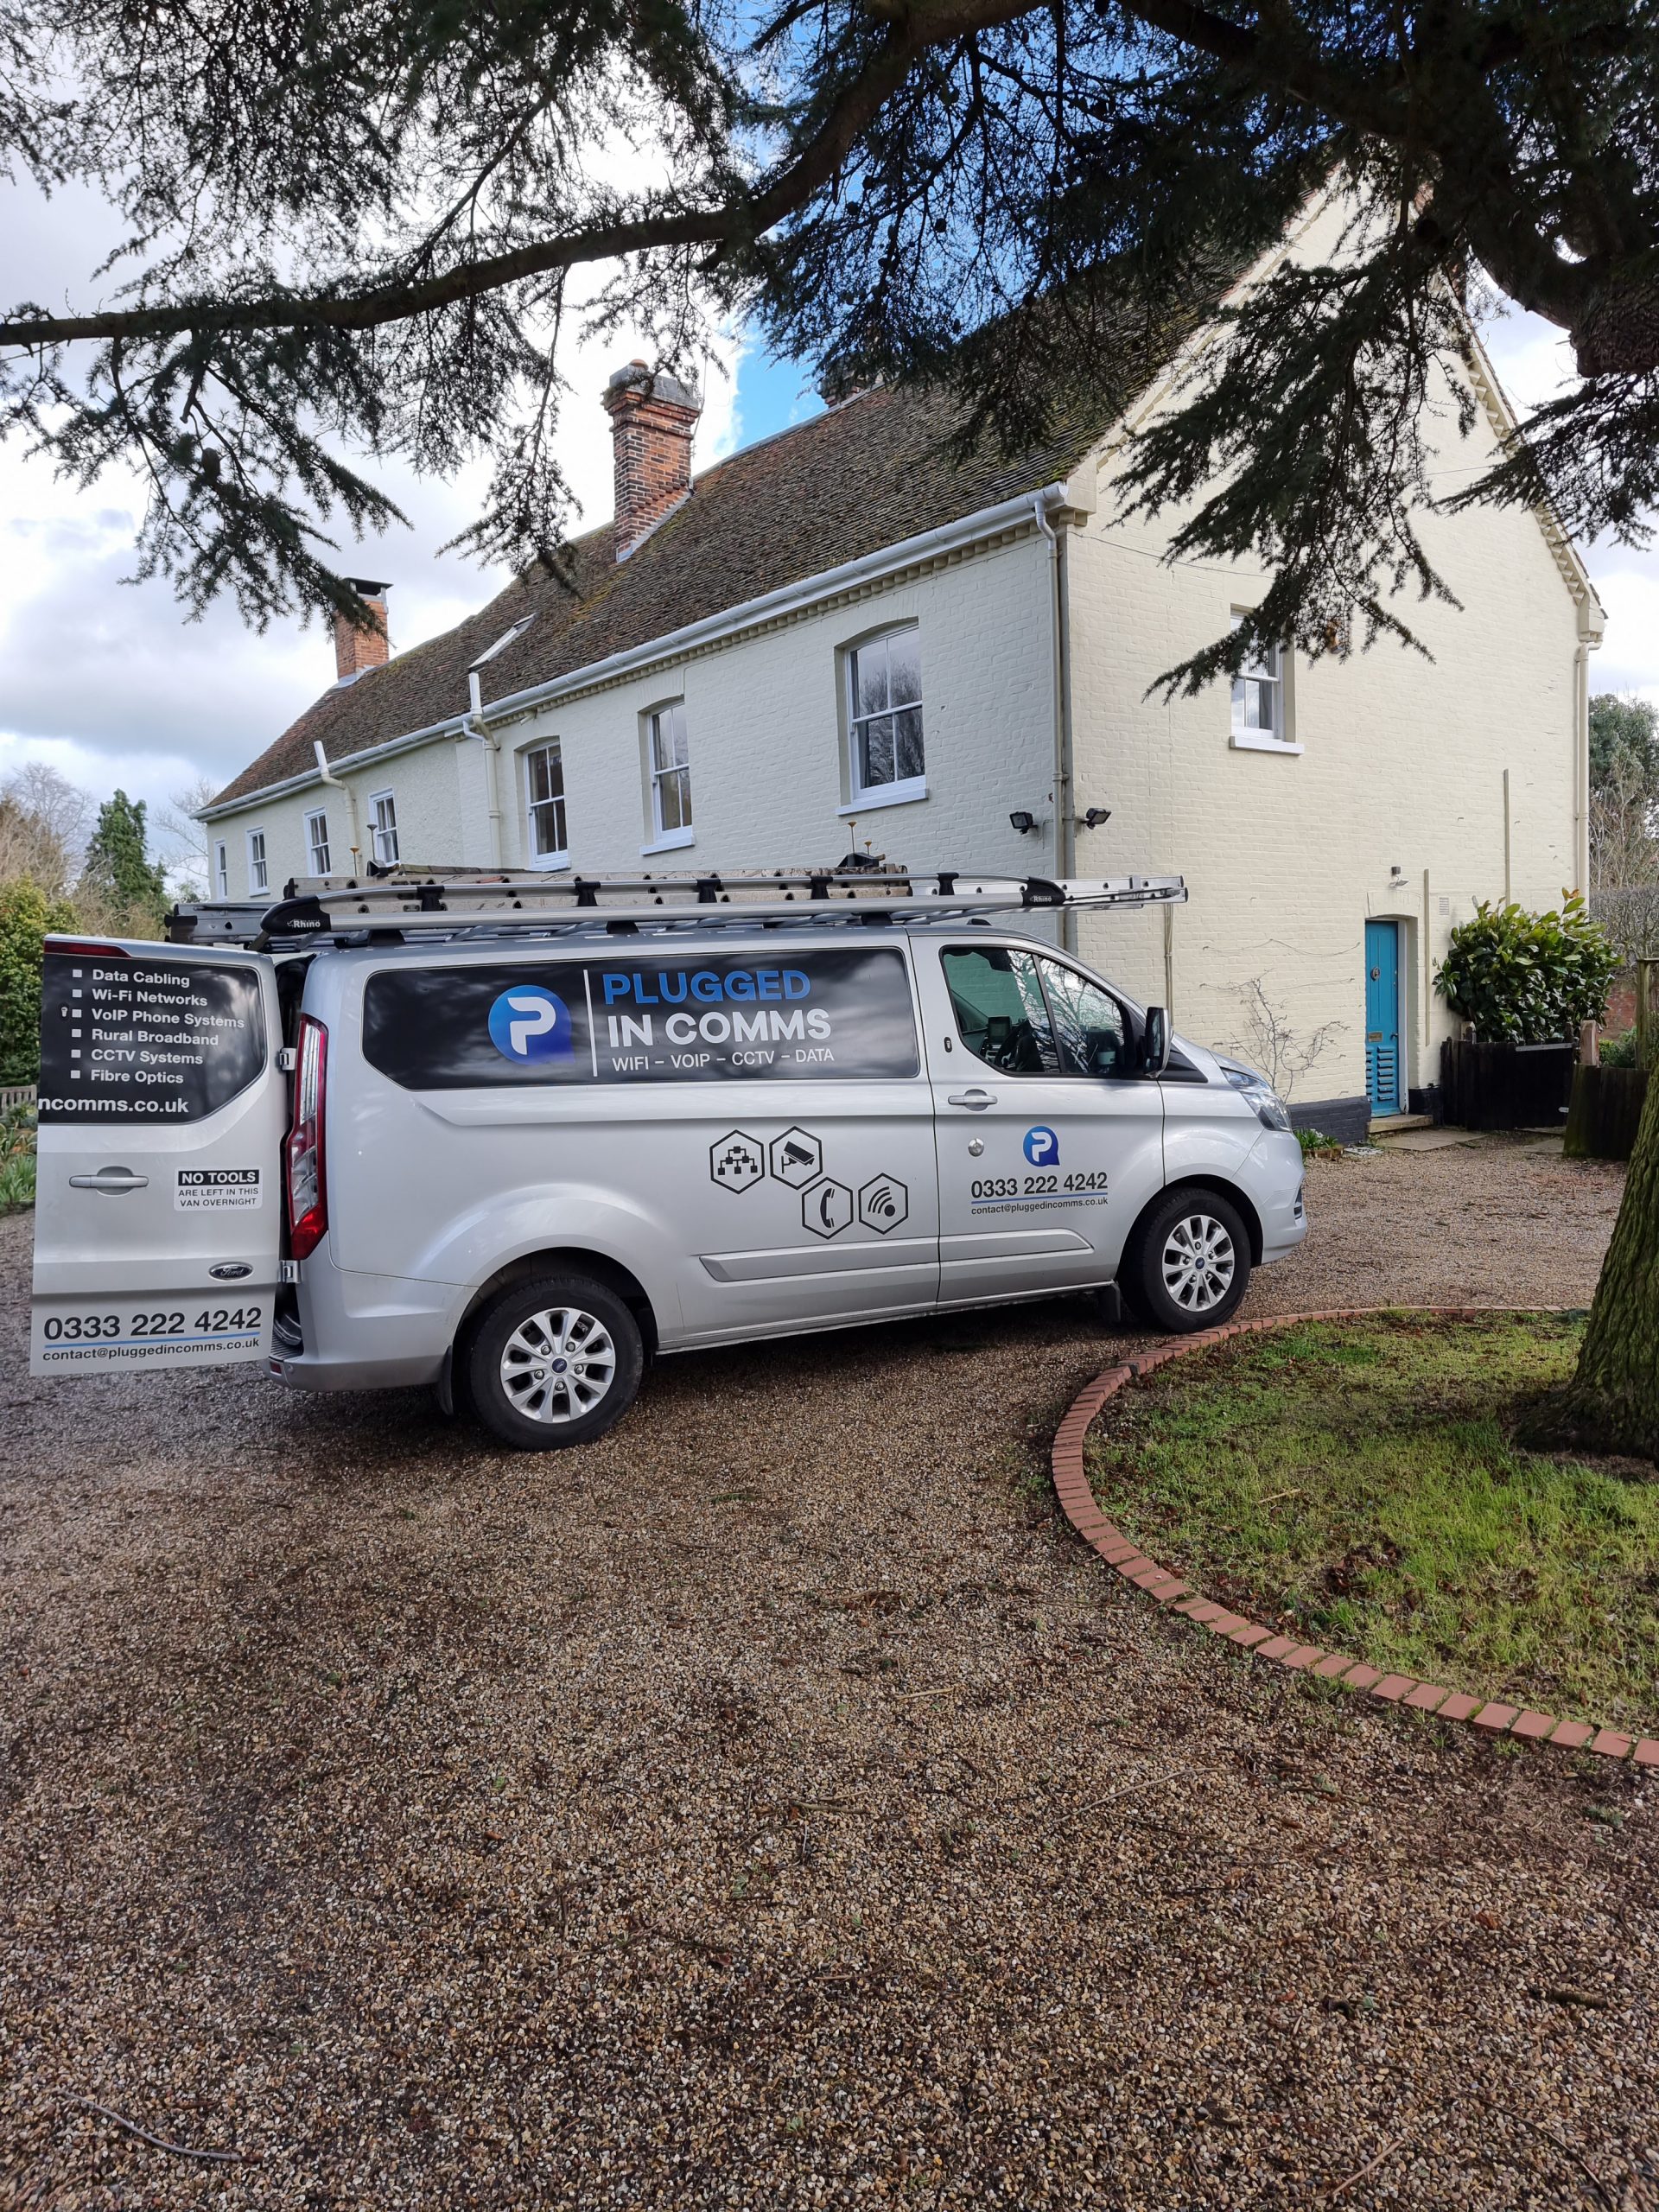 Plugged in Comms van, working in rural Essex for a large house, ensuring efficient communication solutions and connectivity in remote areas.